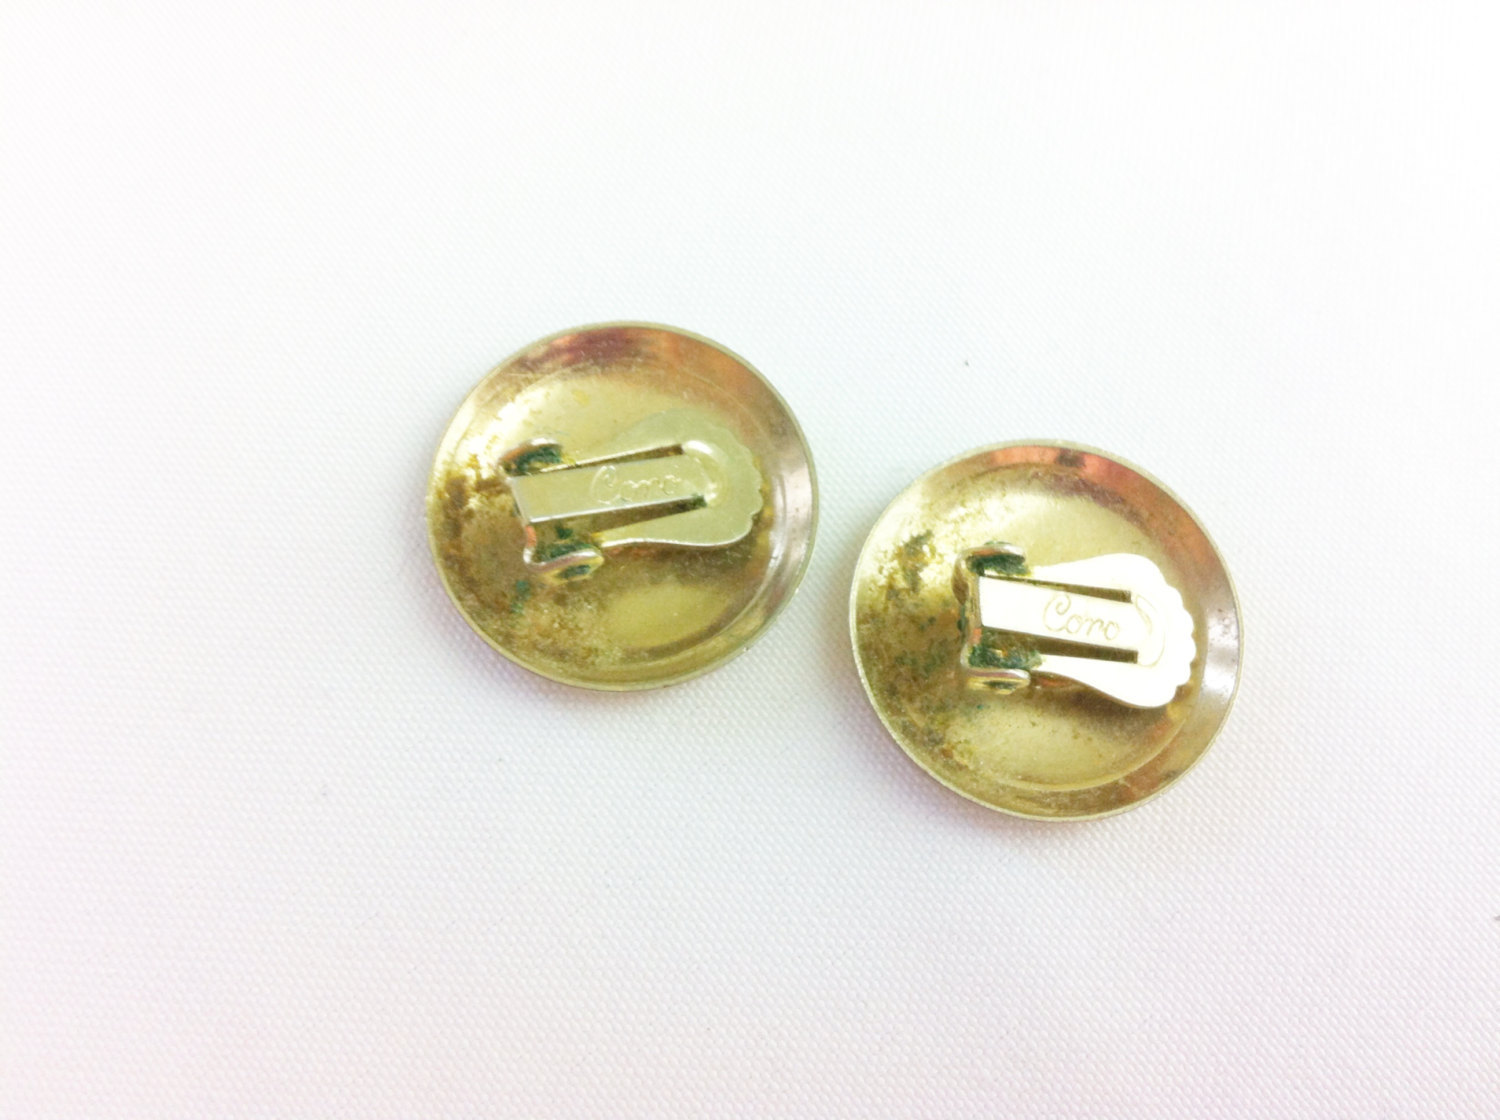 Vintage Coro Earrings - Gold tone Textured Clip On Style - Round Button ...